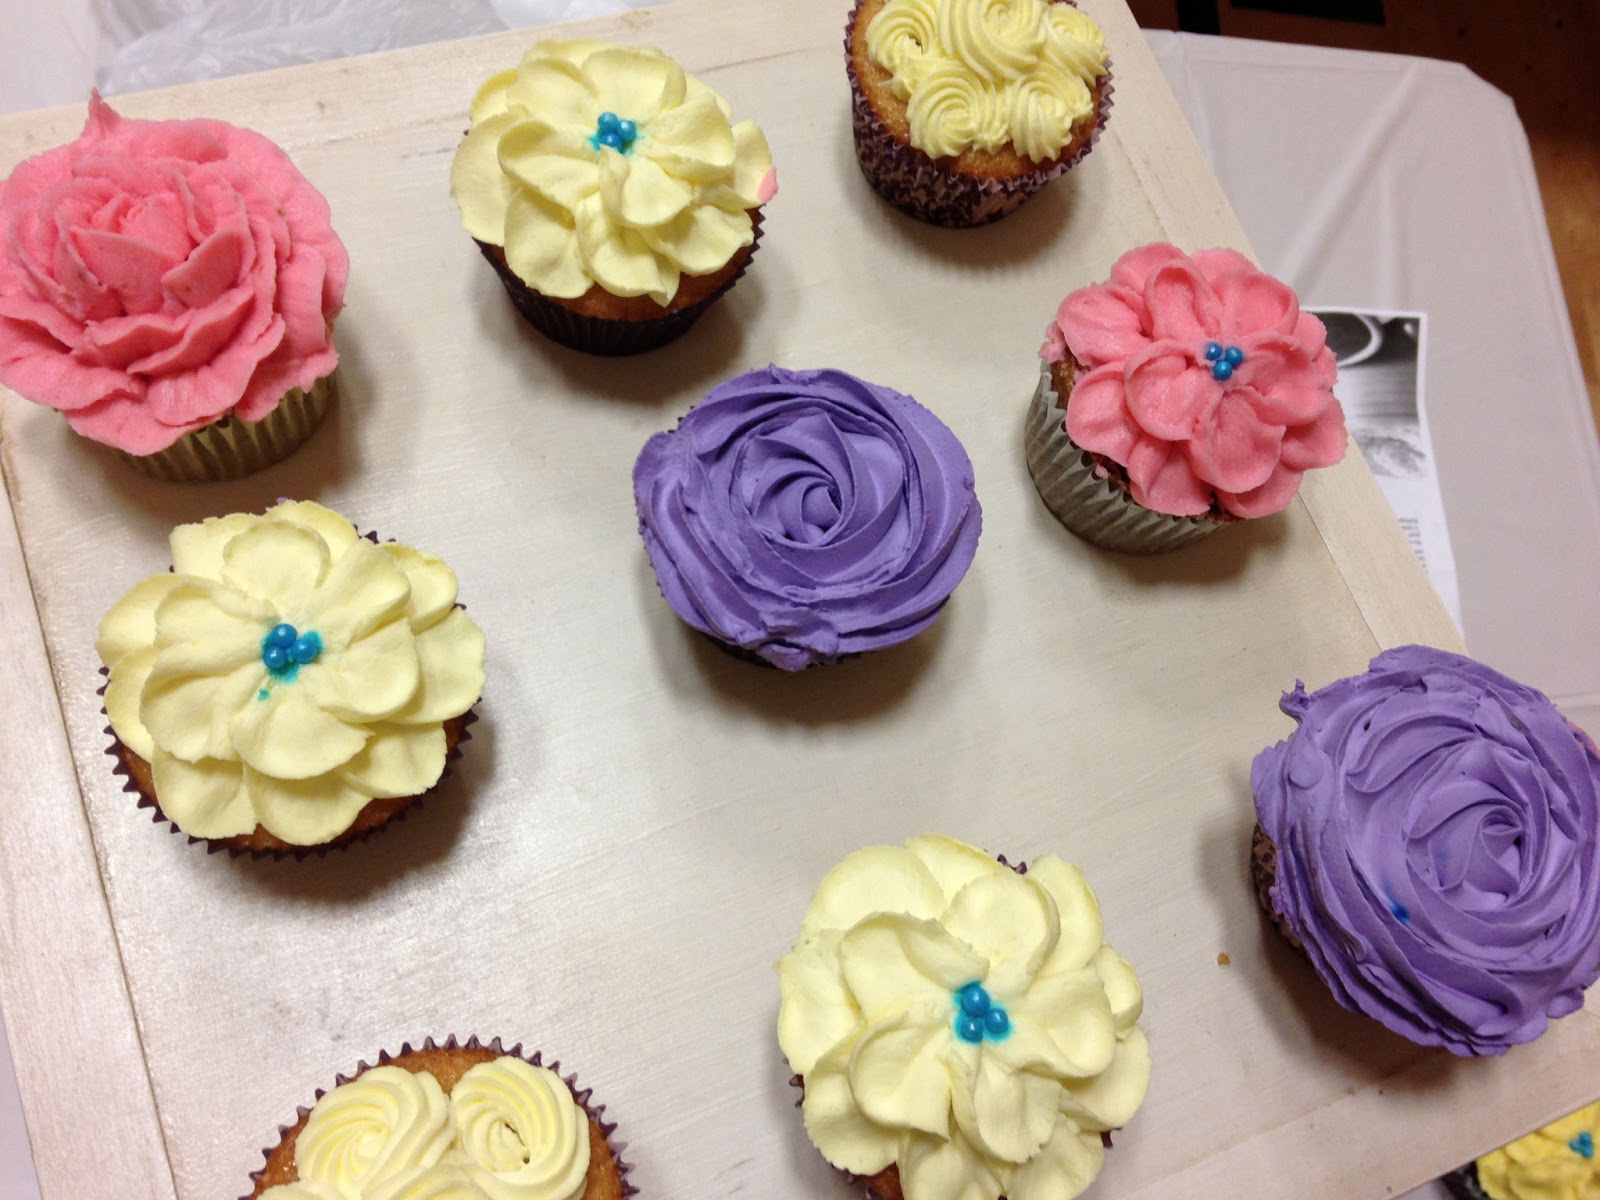 relief-society-lds-cupcake-decorating-class-april-2013